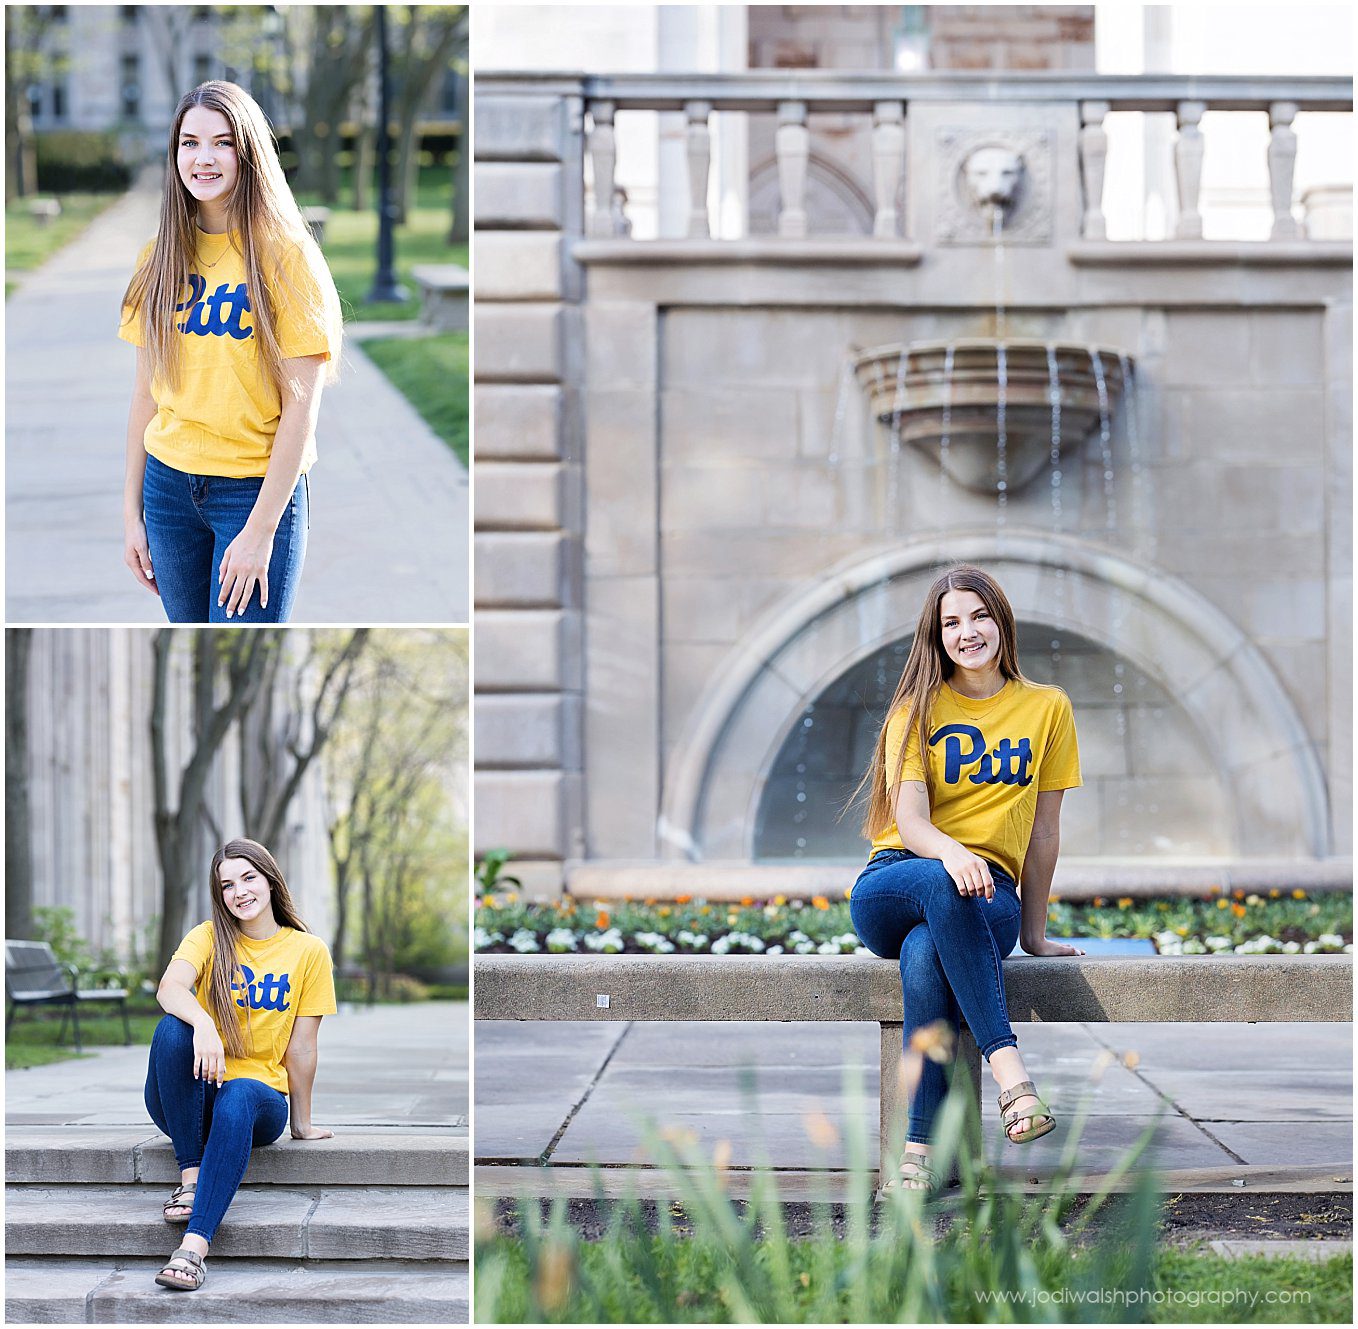 collage of spring senior portraits at Pitt. The senior girl is wearing a blue and yellow University of Pittsburgh t-shirt.  She's seen sitting on a sidewalk near the Cathedral of Learning and smiling.